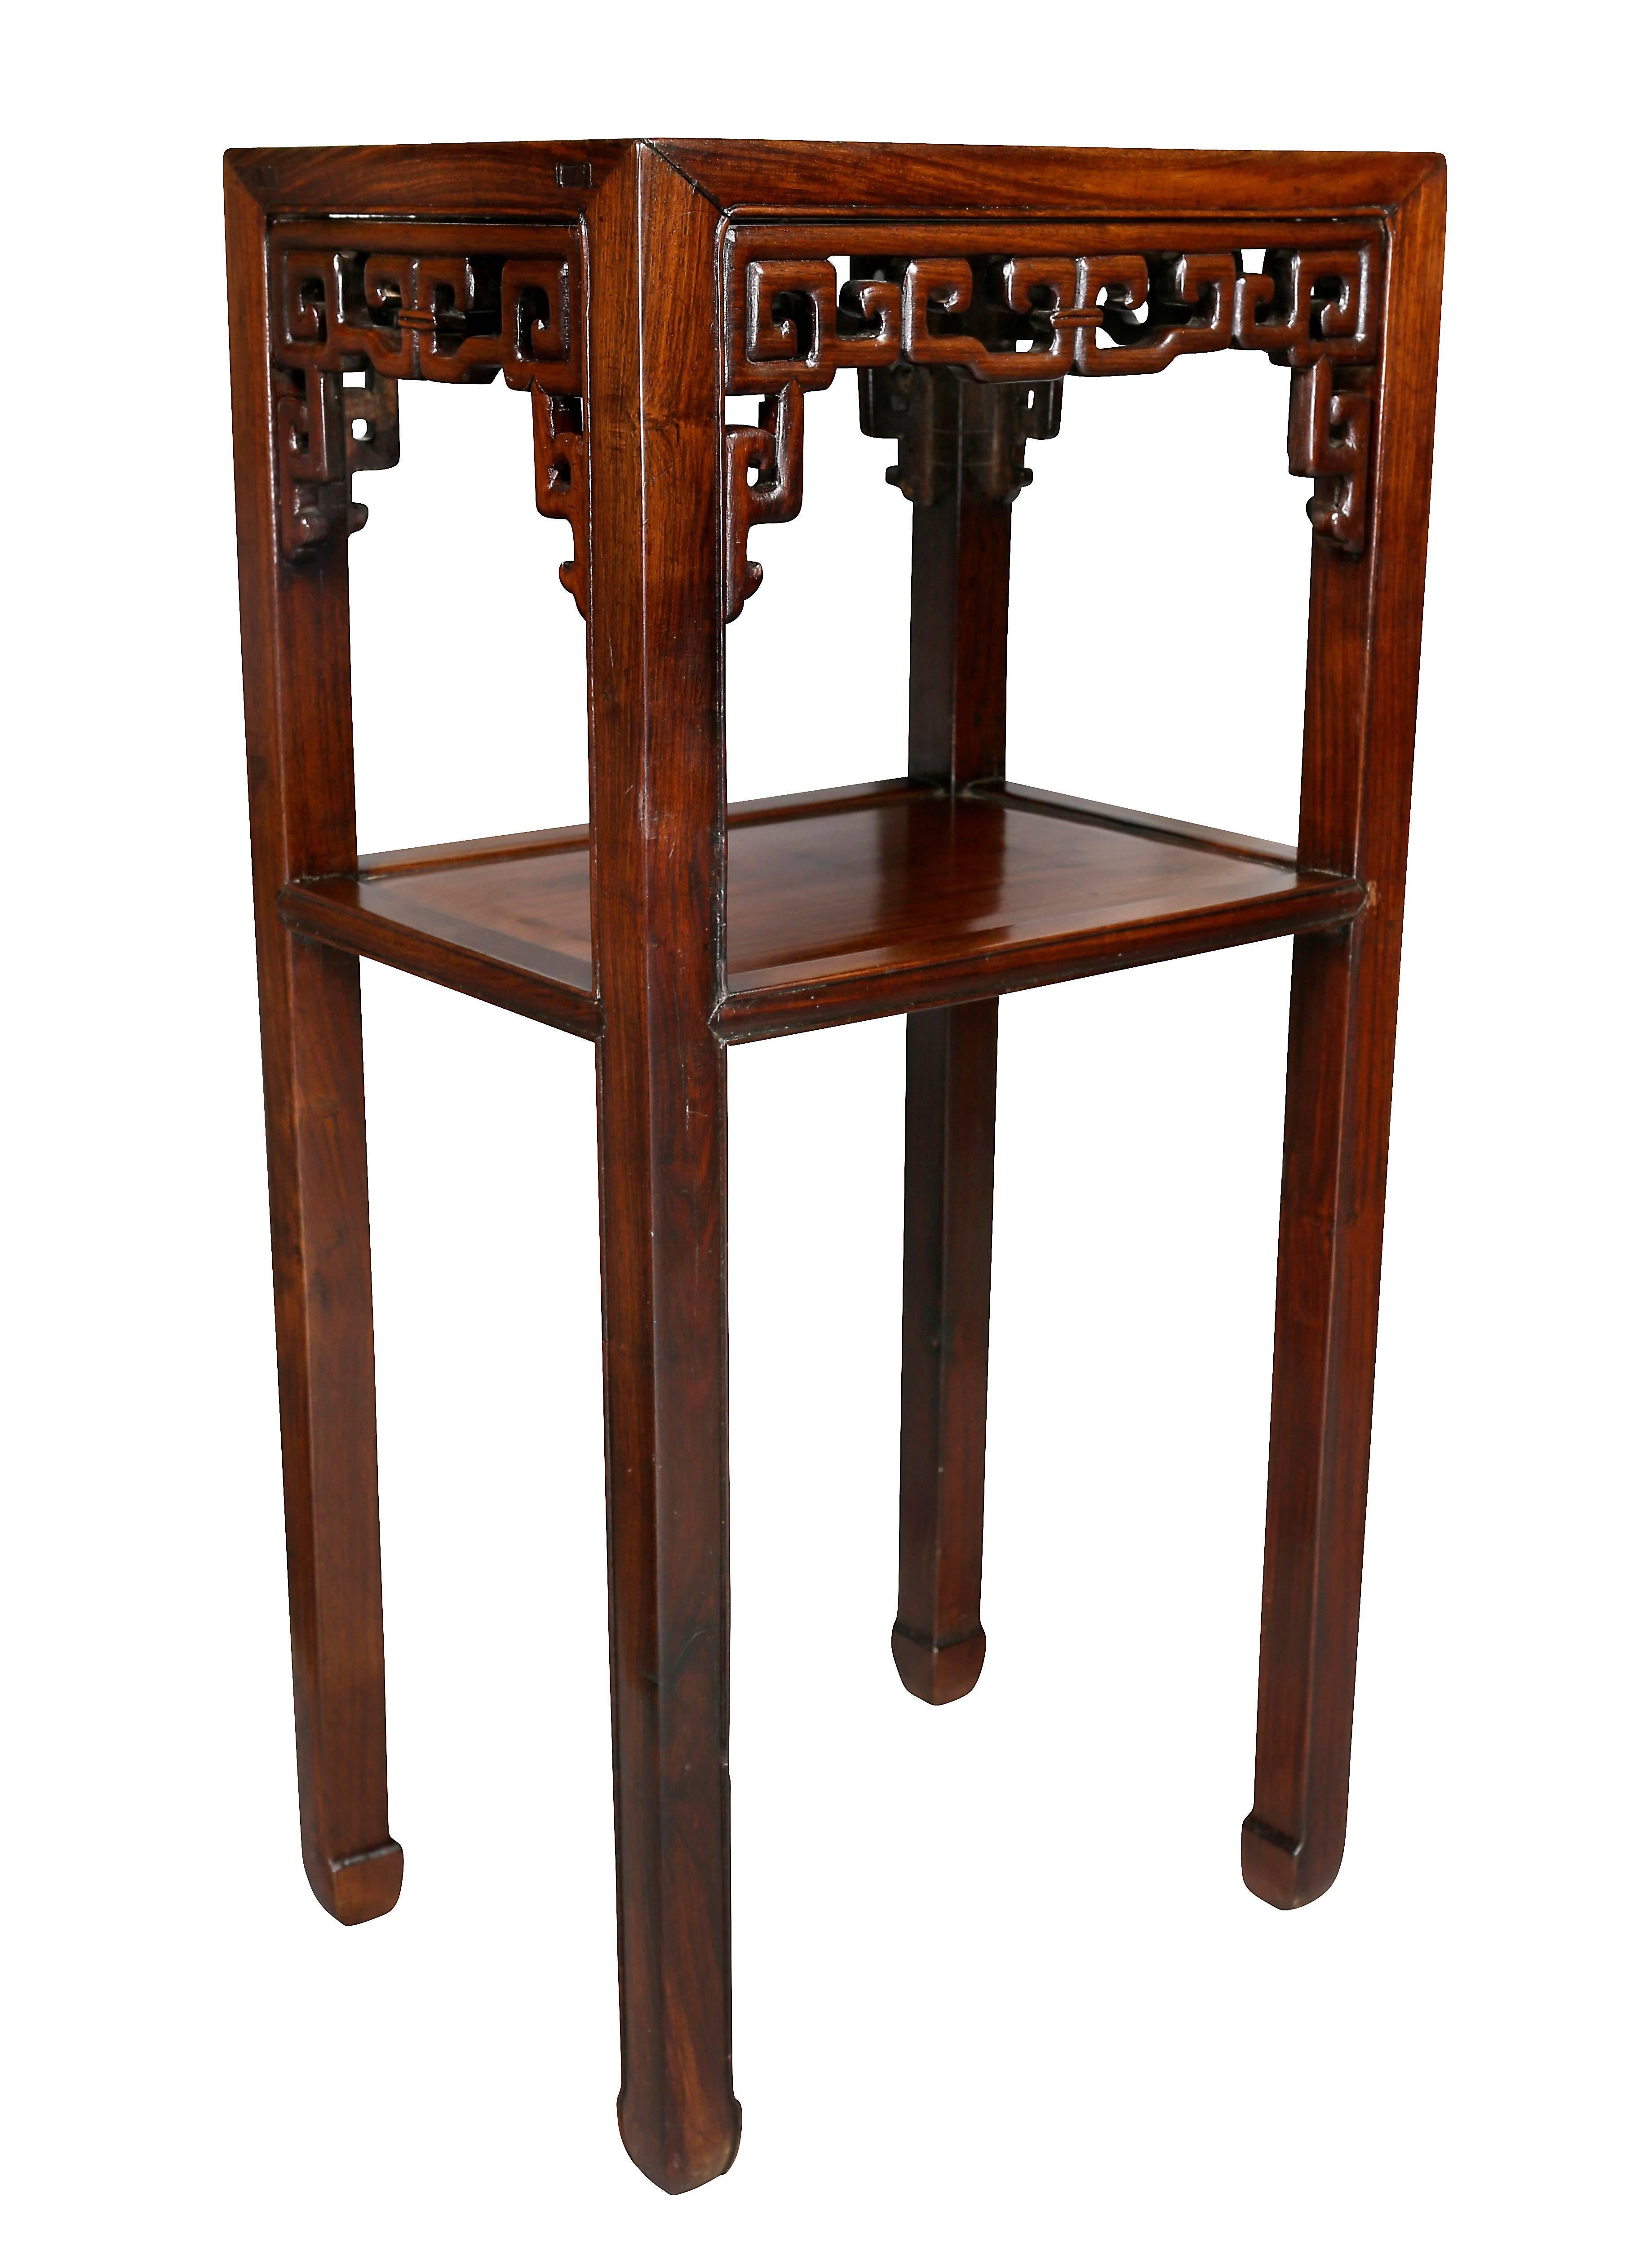 Each with a rectangular top over a carved openwork frieze with square section legs joined by a lower shelf, scrolled feet.